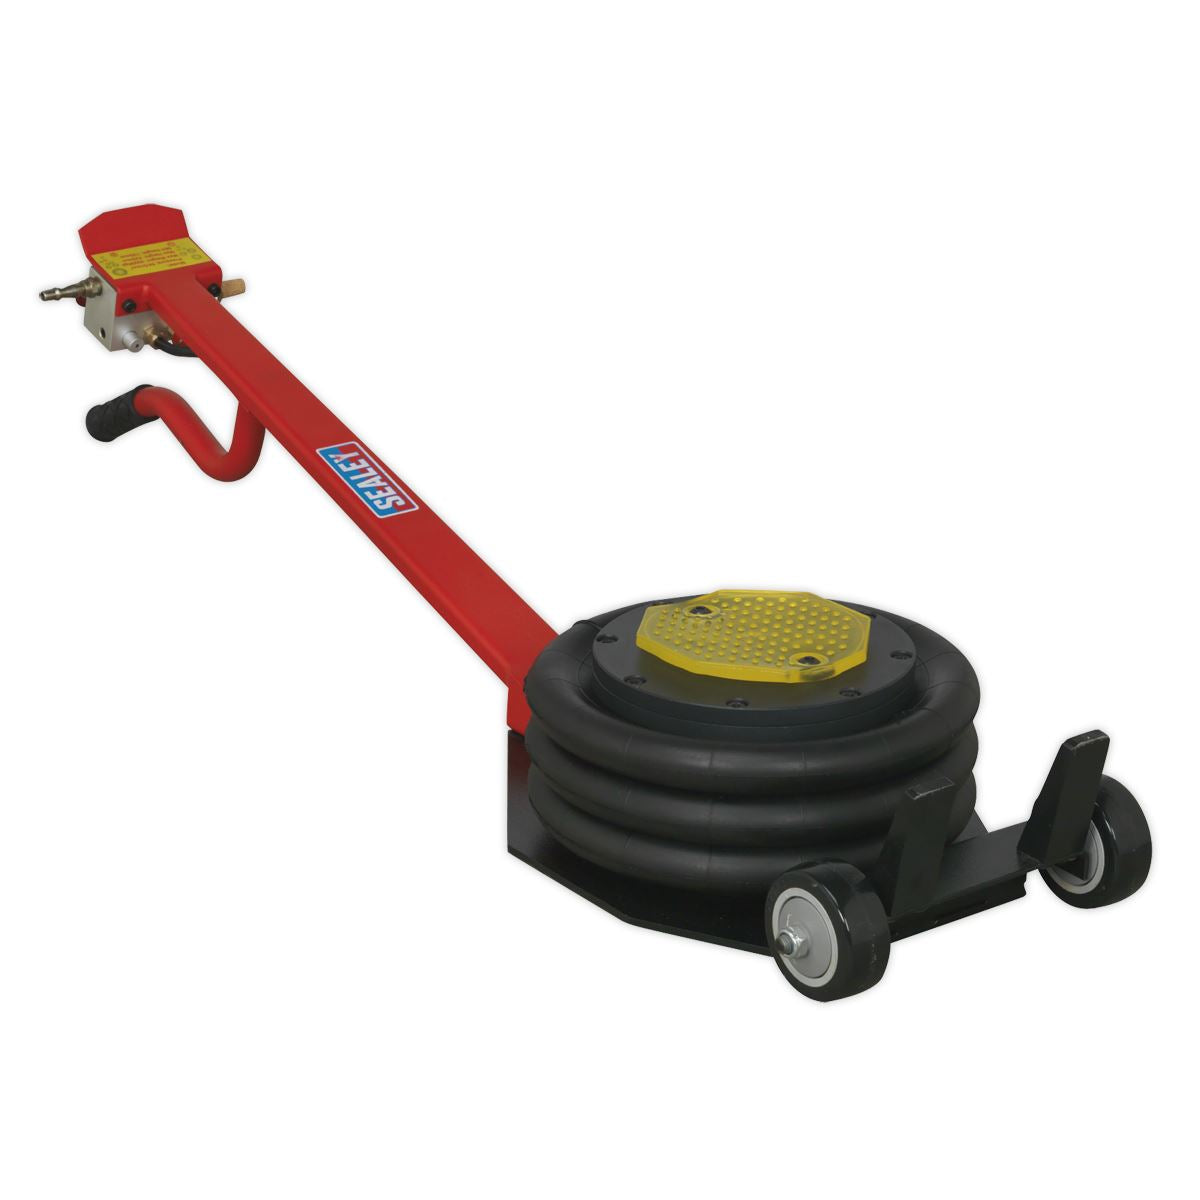 Sealey Premier Premier Air Operated Fast Jack 3 Tonne 3-Stage - Long Handle